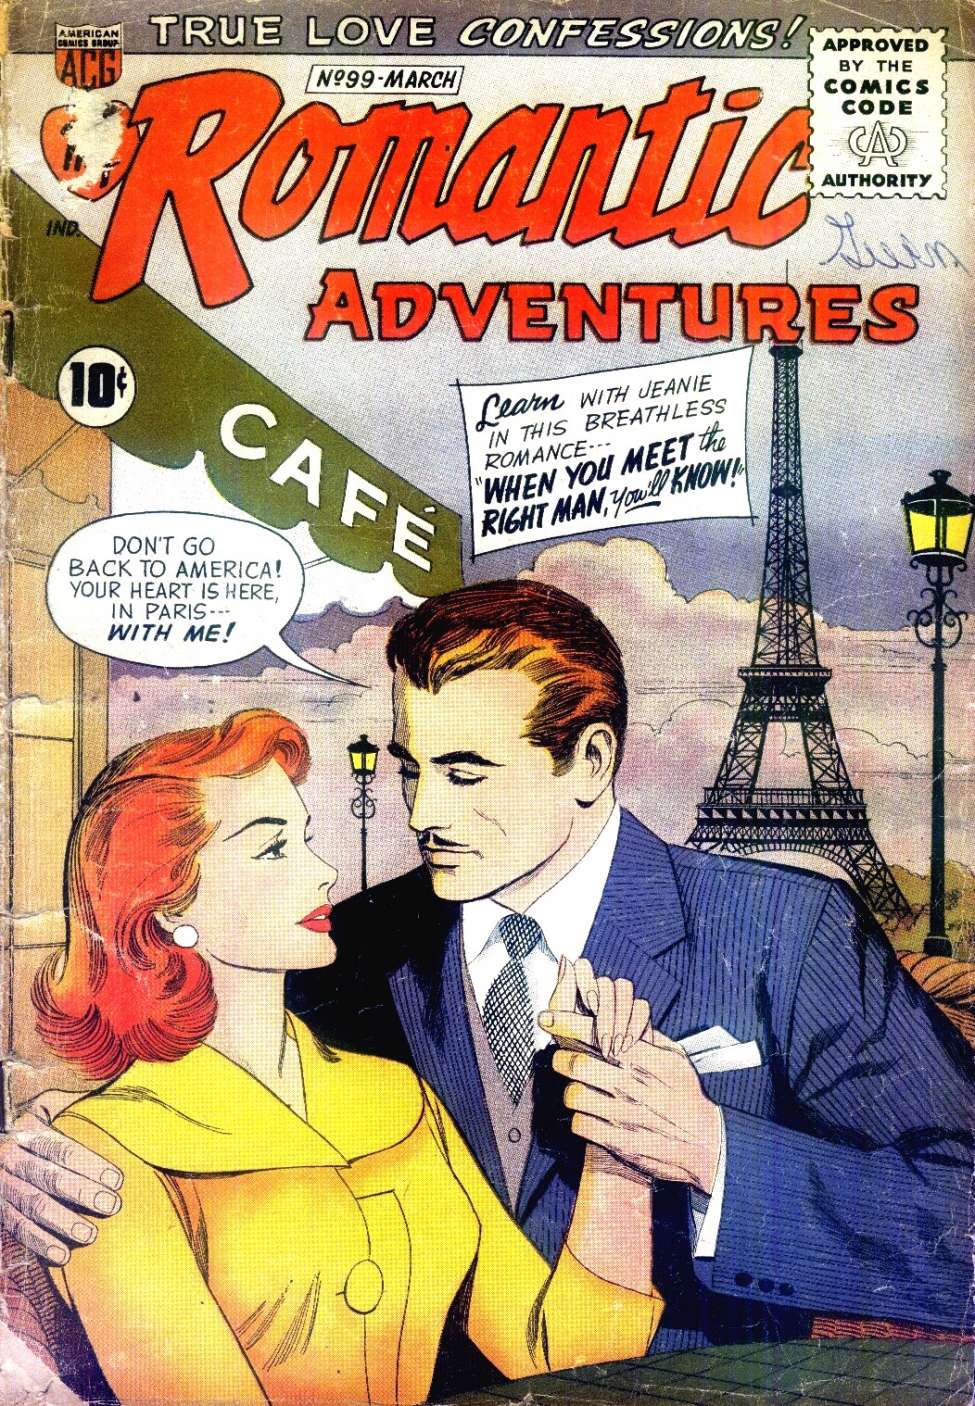 Book Cover For My Romantic Adventures 99